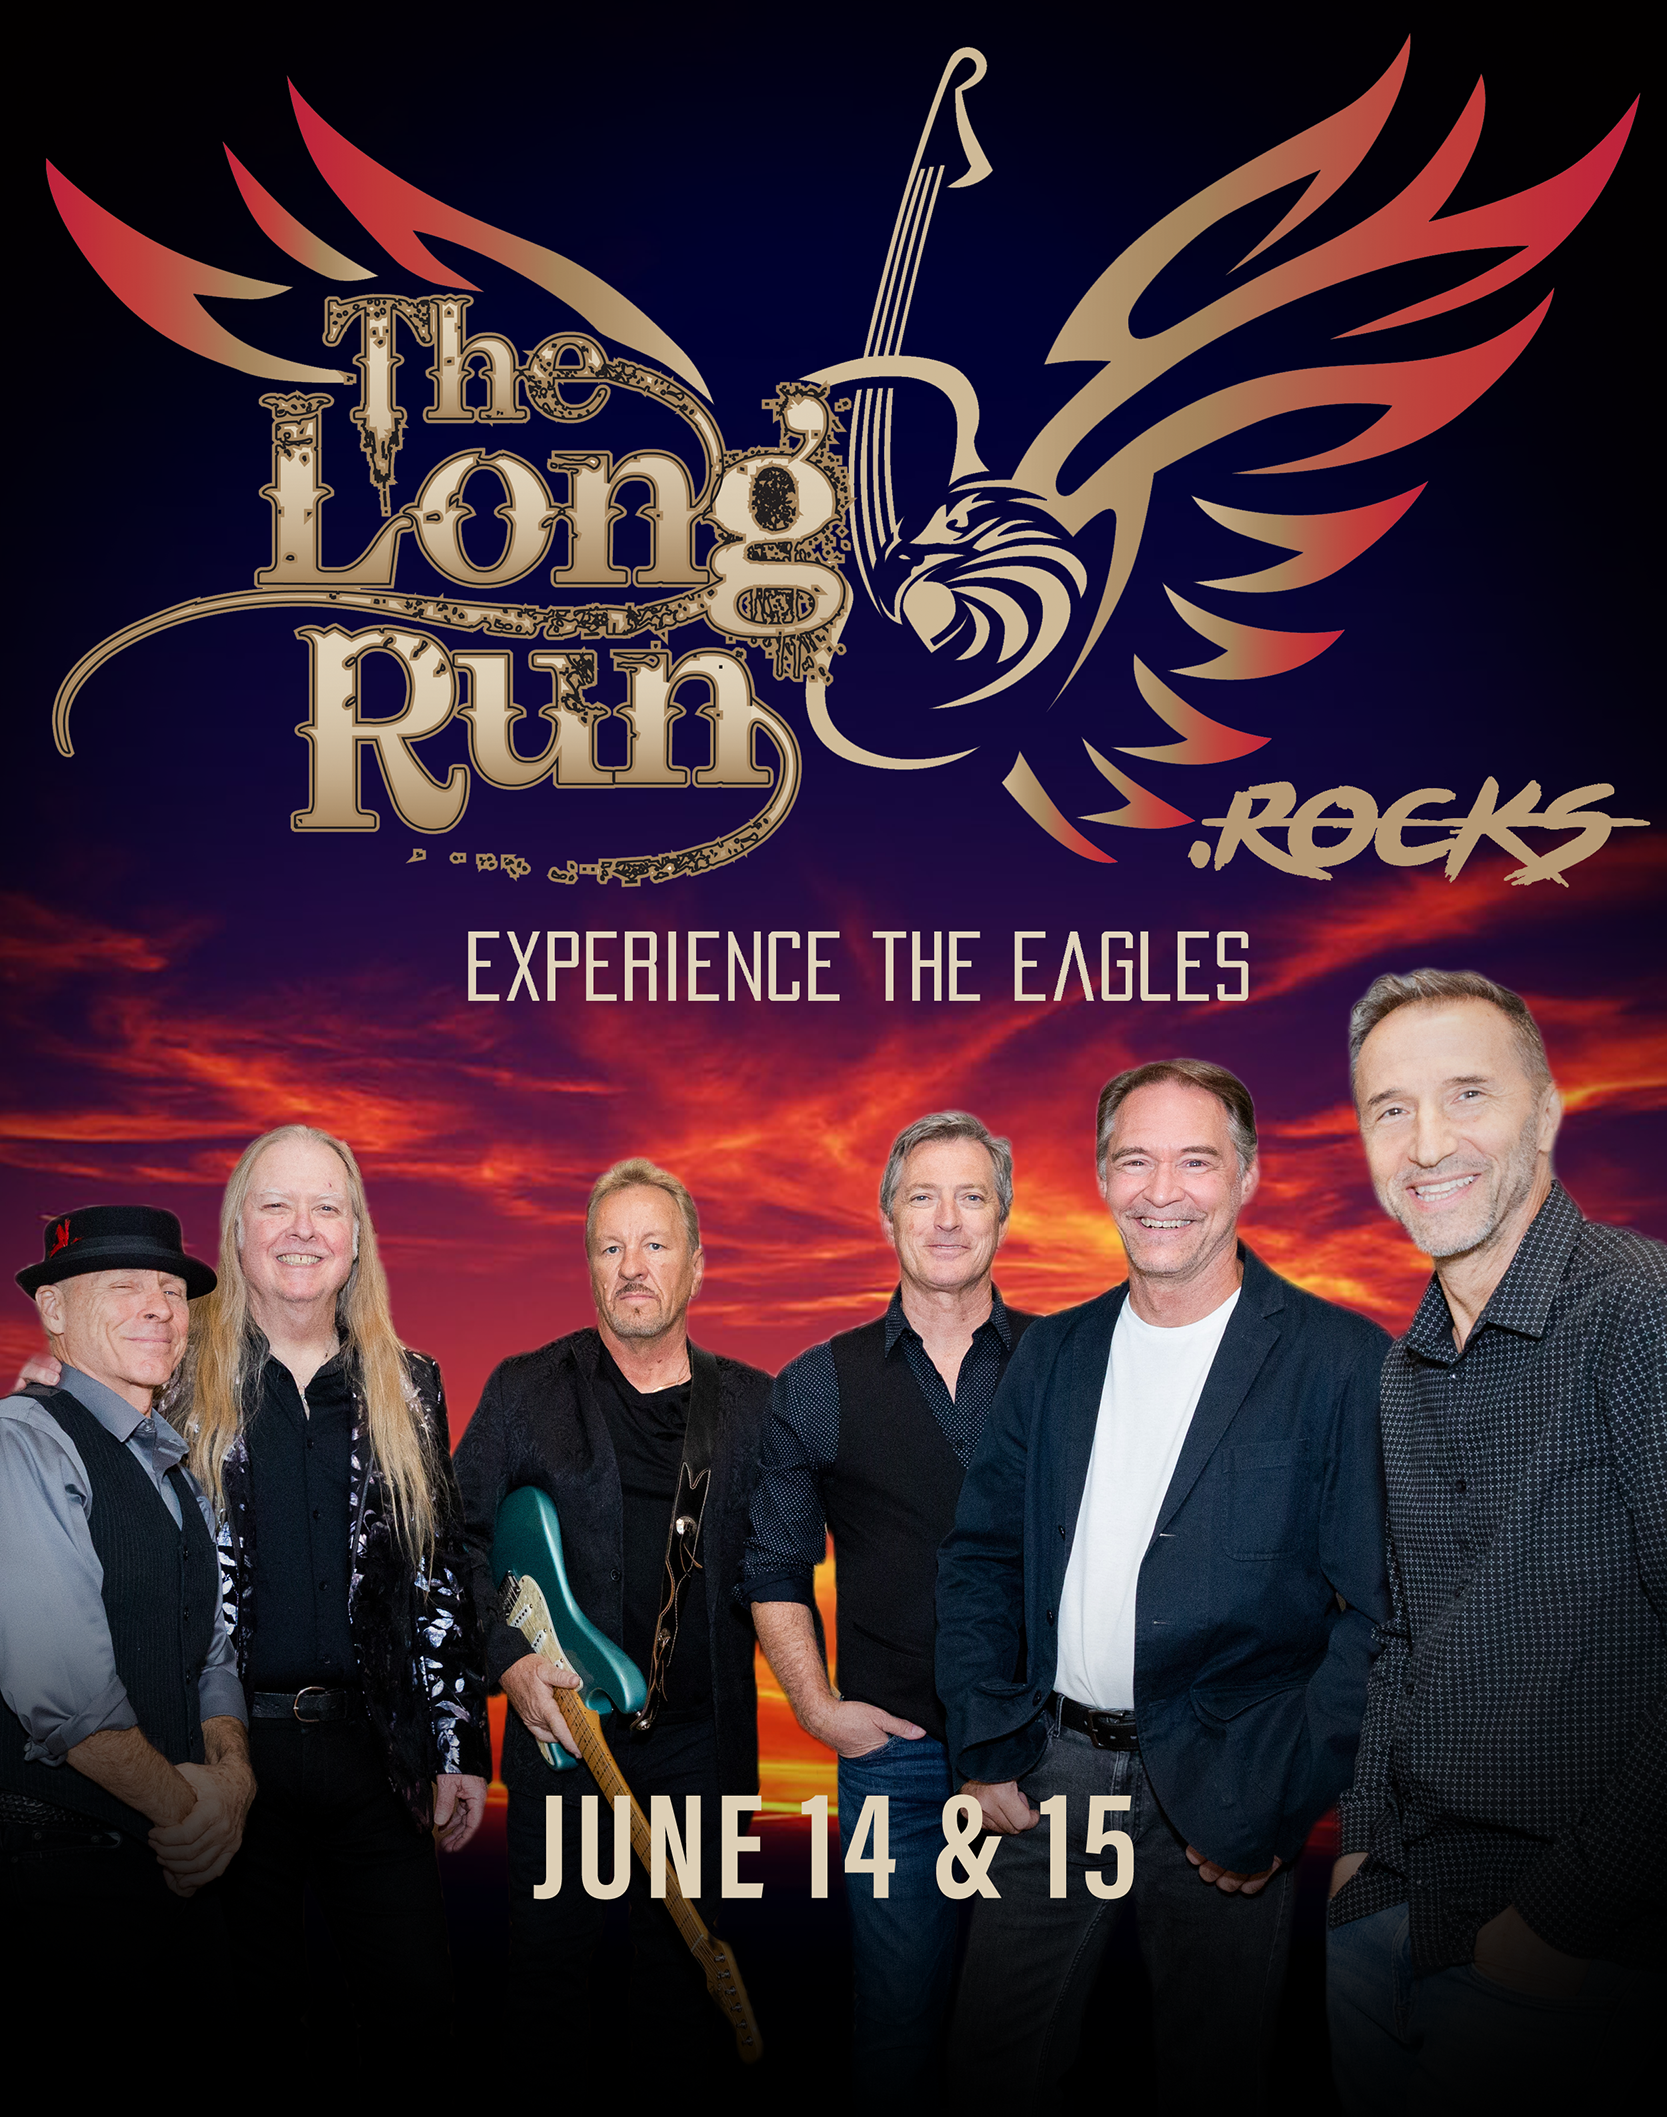 The Long run, a tribute to the music of The Eagles on June 14th and 15th